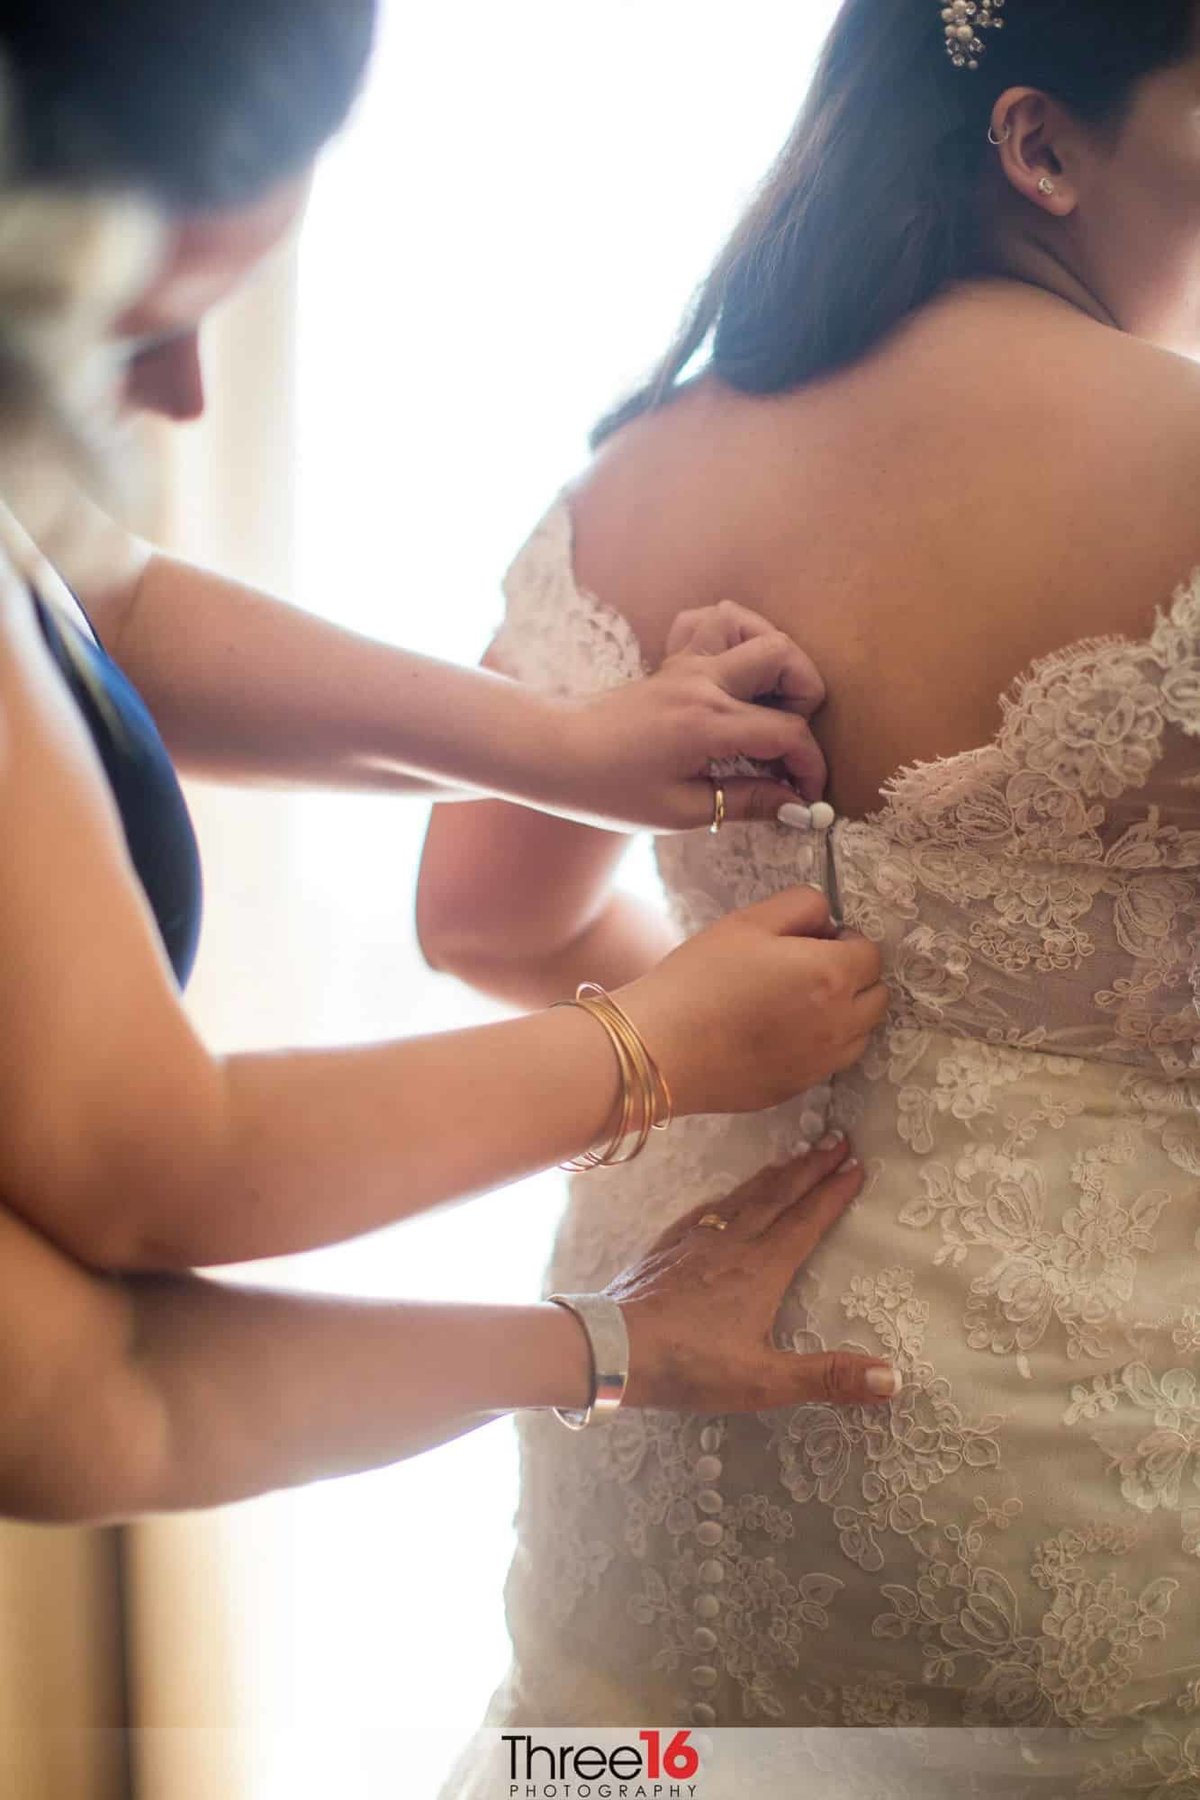 Bride having her dress buttoned up before the ceremony